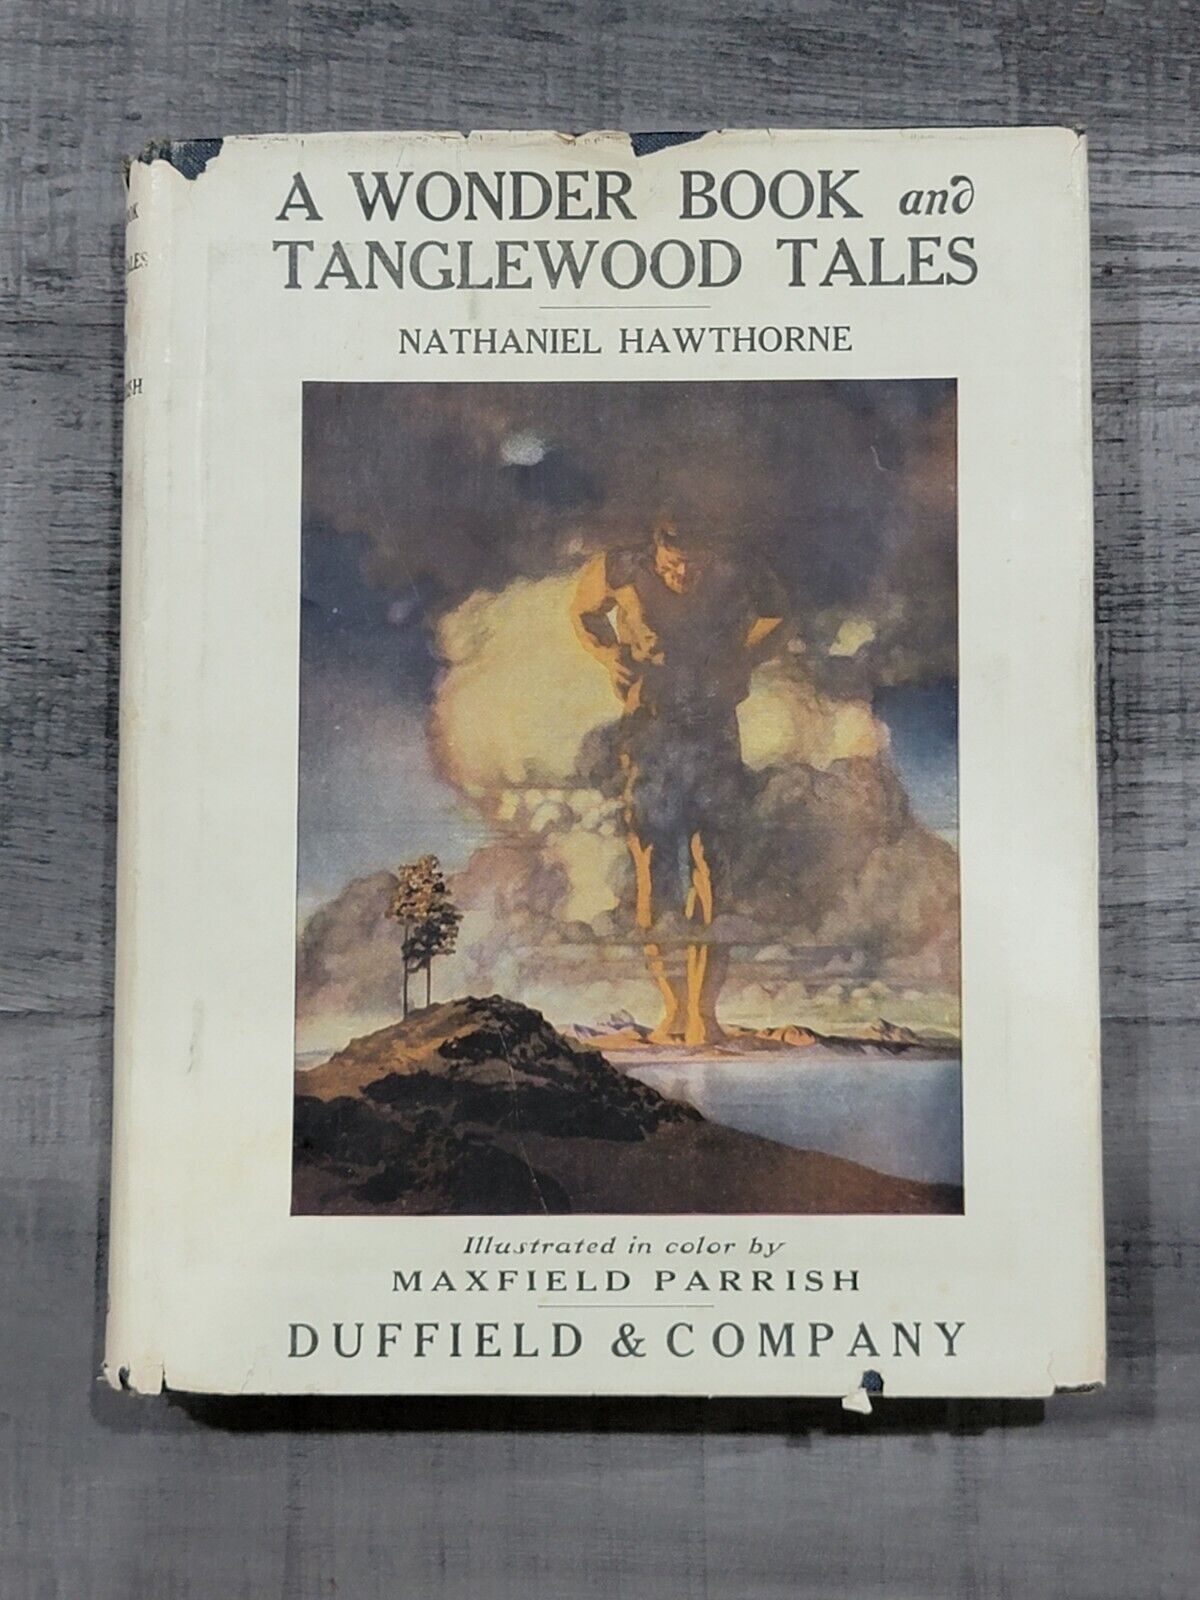 A Wonder Book and Tanglewood Tales Nathaniel Hawthorne Maxfield Parrish 1910 HCD